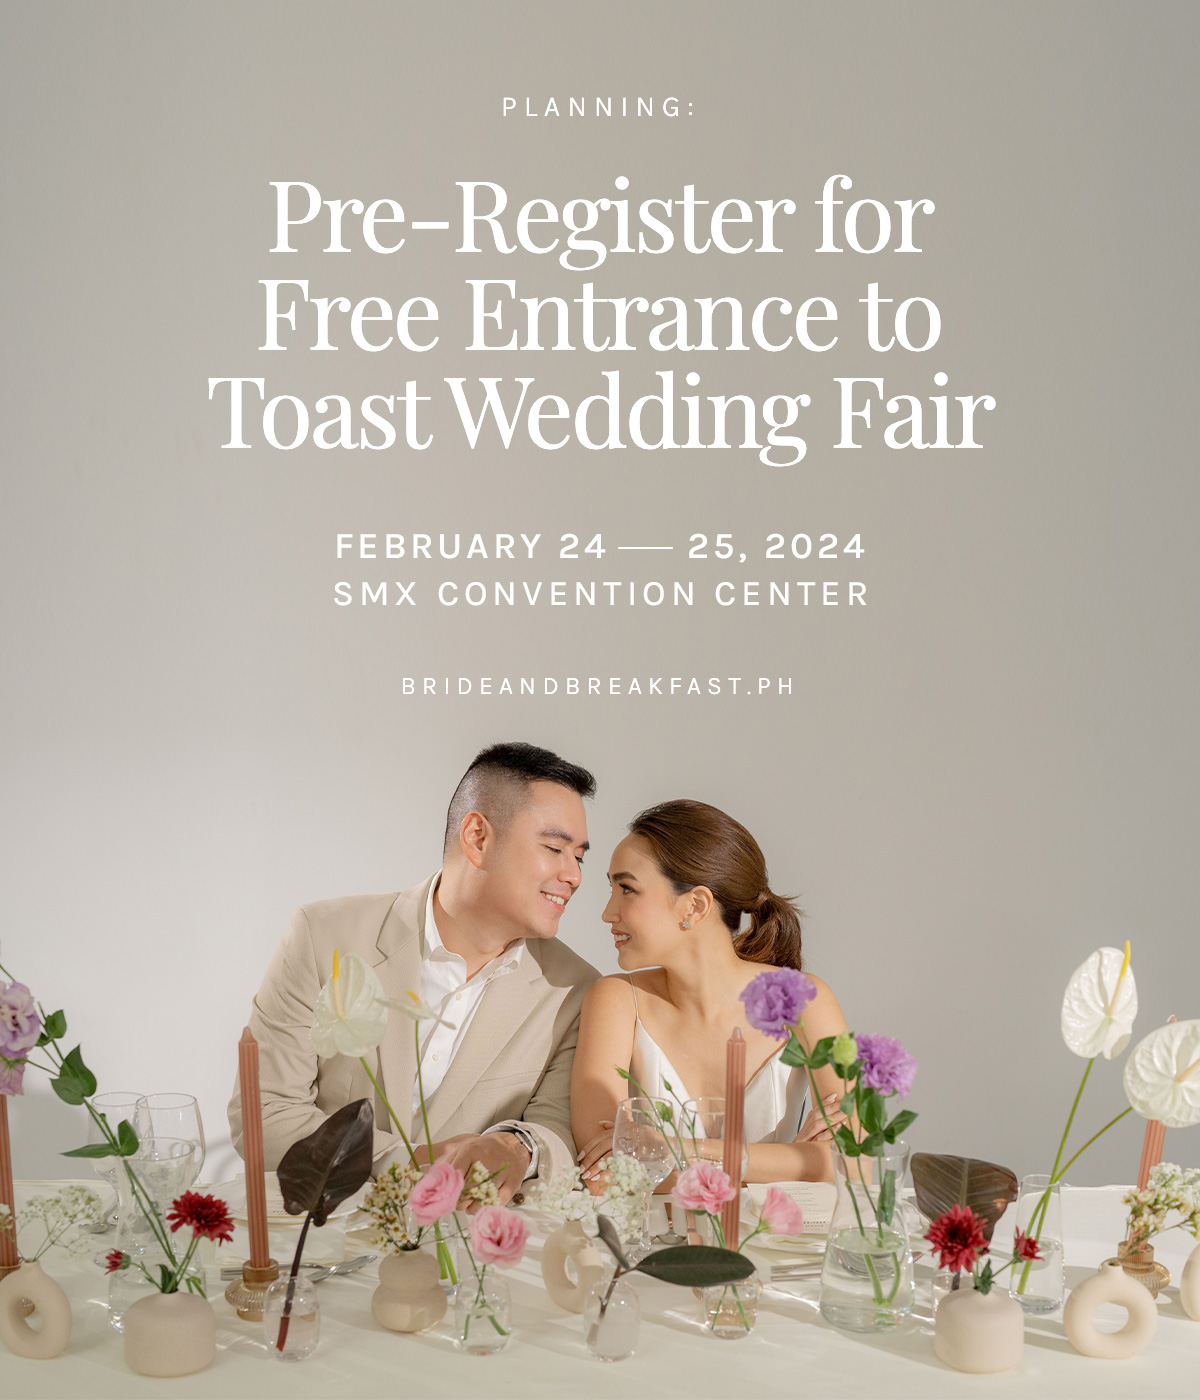 Pre-REgister for FREE Entrance to Toast Wedding Fair 